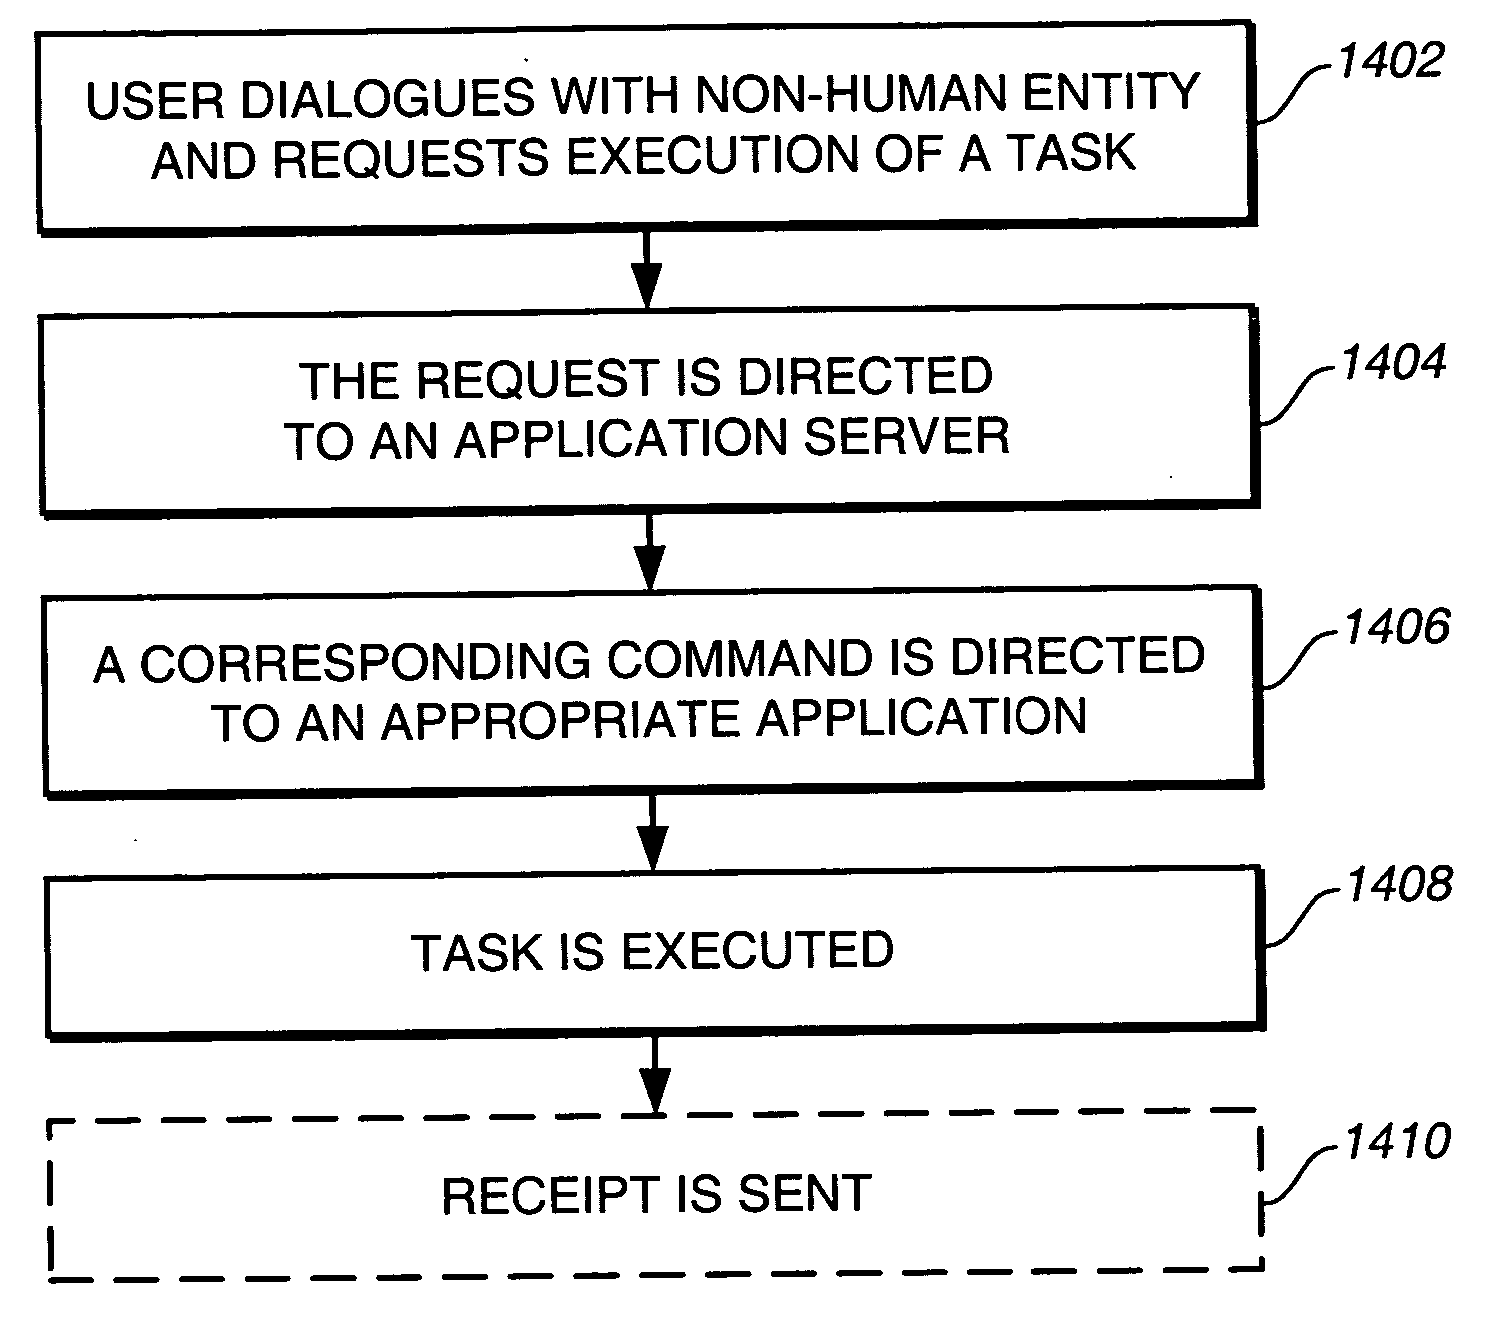 Content and task-execution services provided through dialog-based interfaces